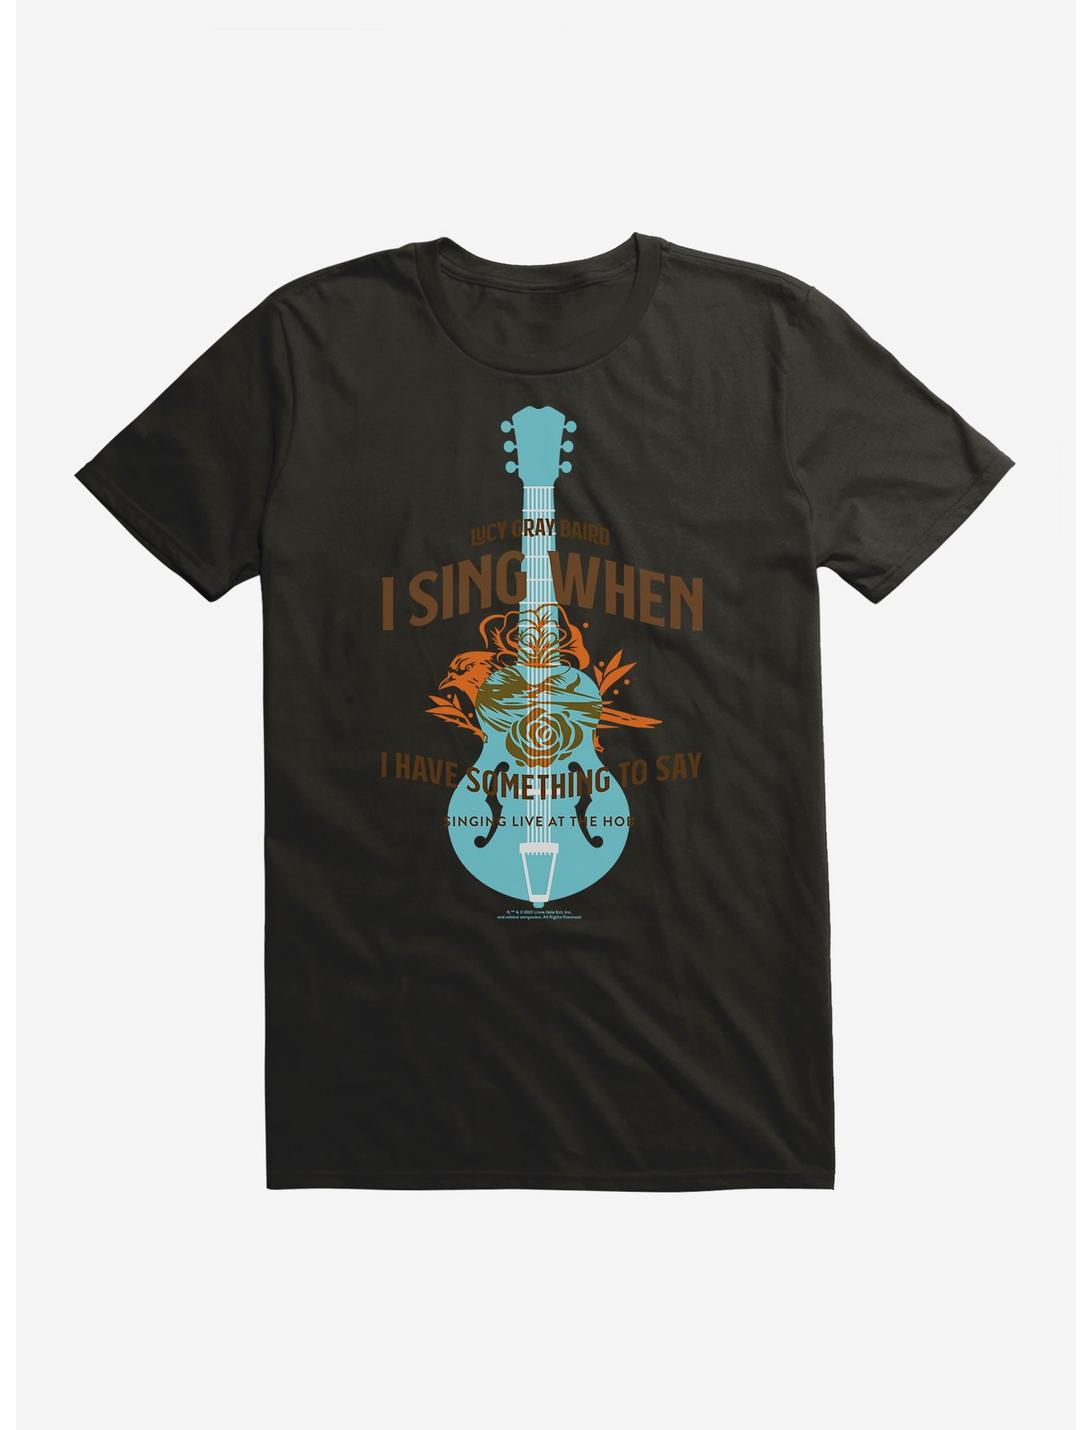 Hunger Games: The Ballad Of Songbirds And Snakes Lucy Gray Baird Guitar T-Shirt, , hi-res